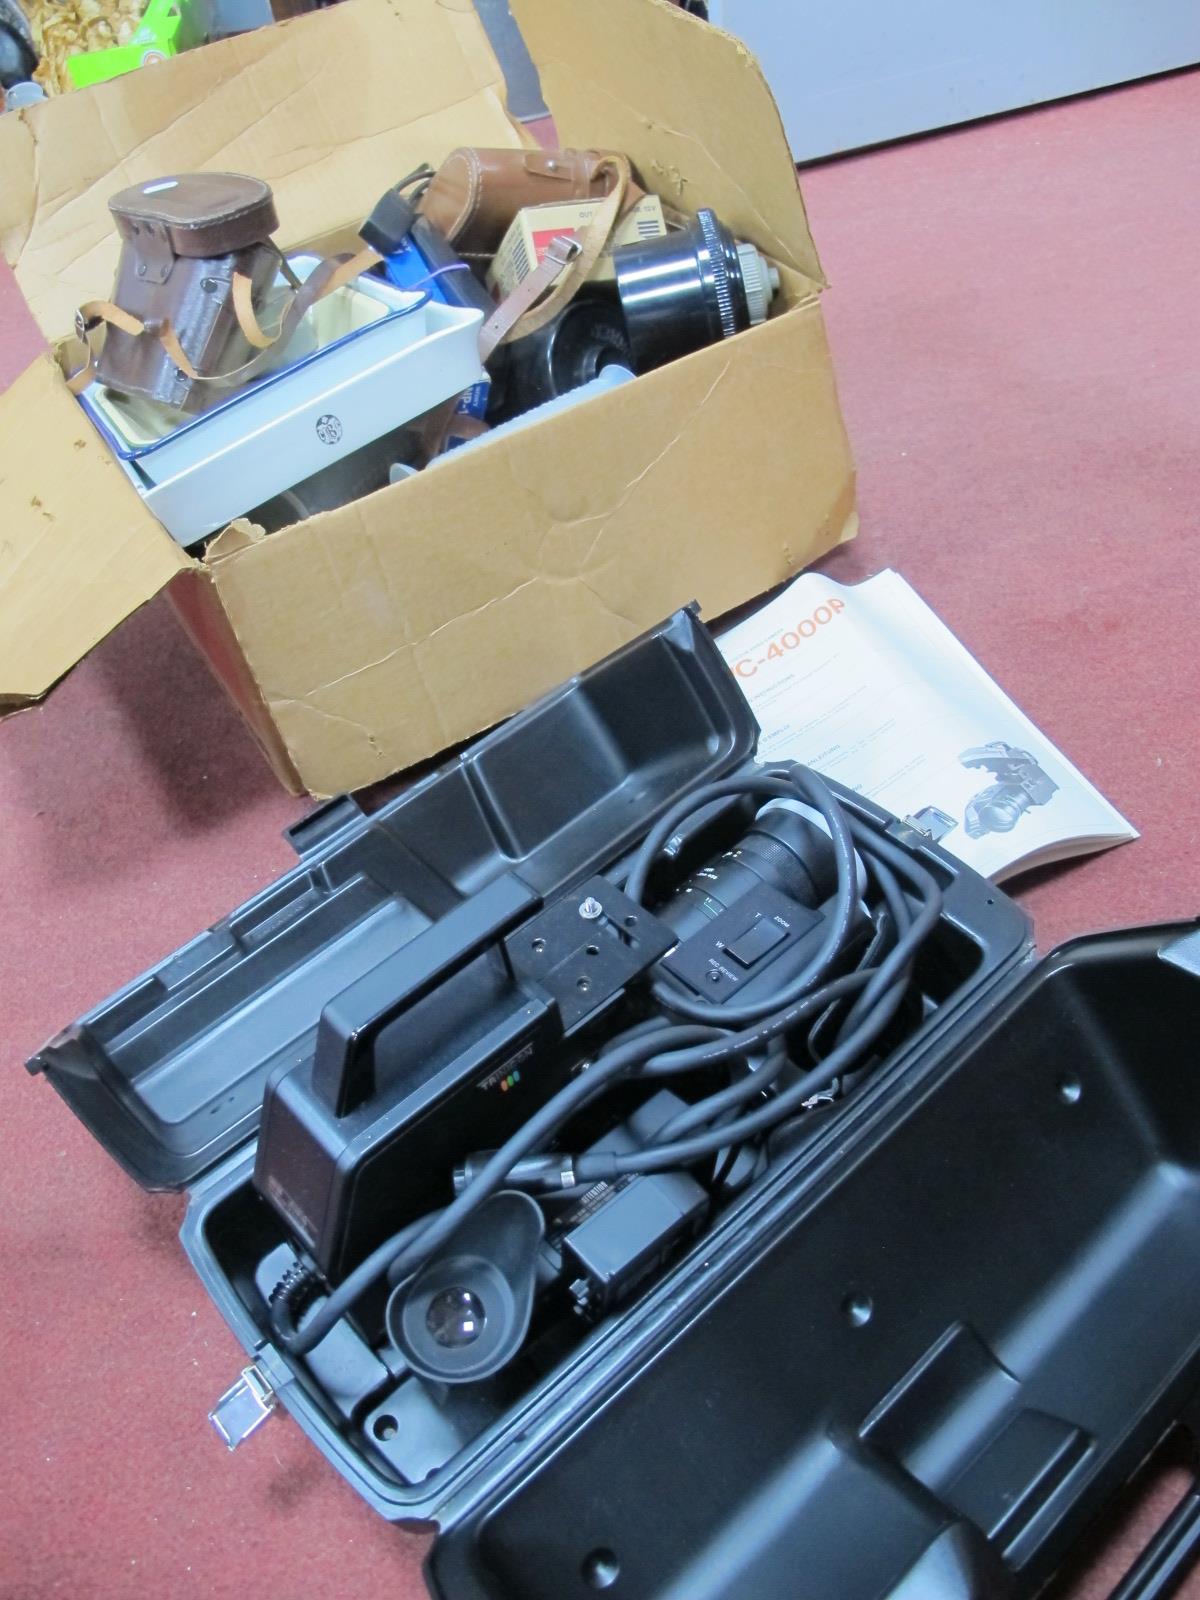 Sony HVC-4000P Colour Video Camera, enlarger, Boots pottery tray, Kershaw, Regent Binoculars etc.